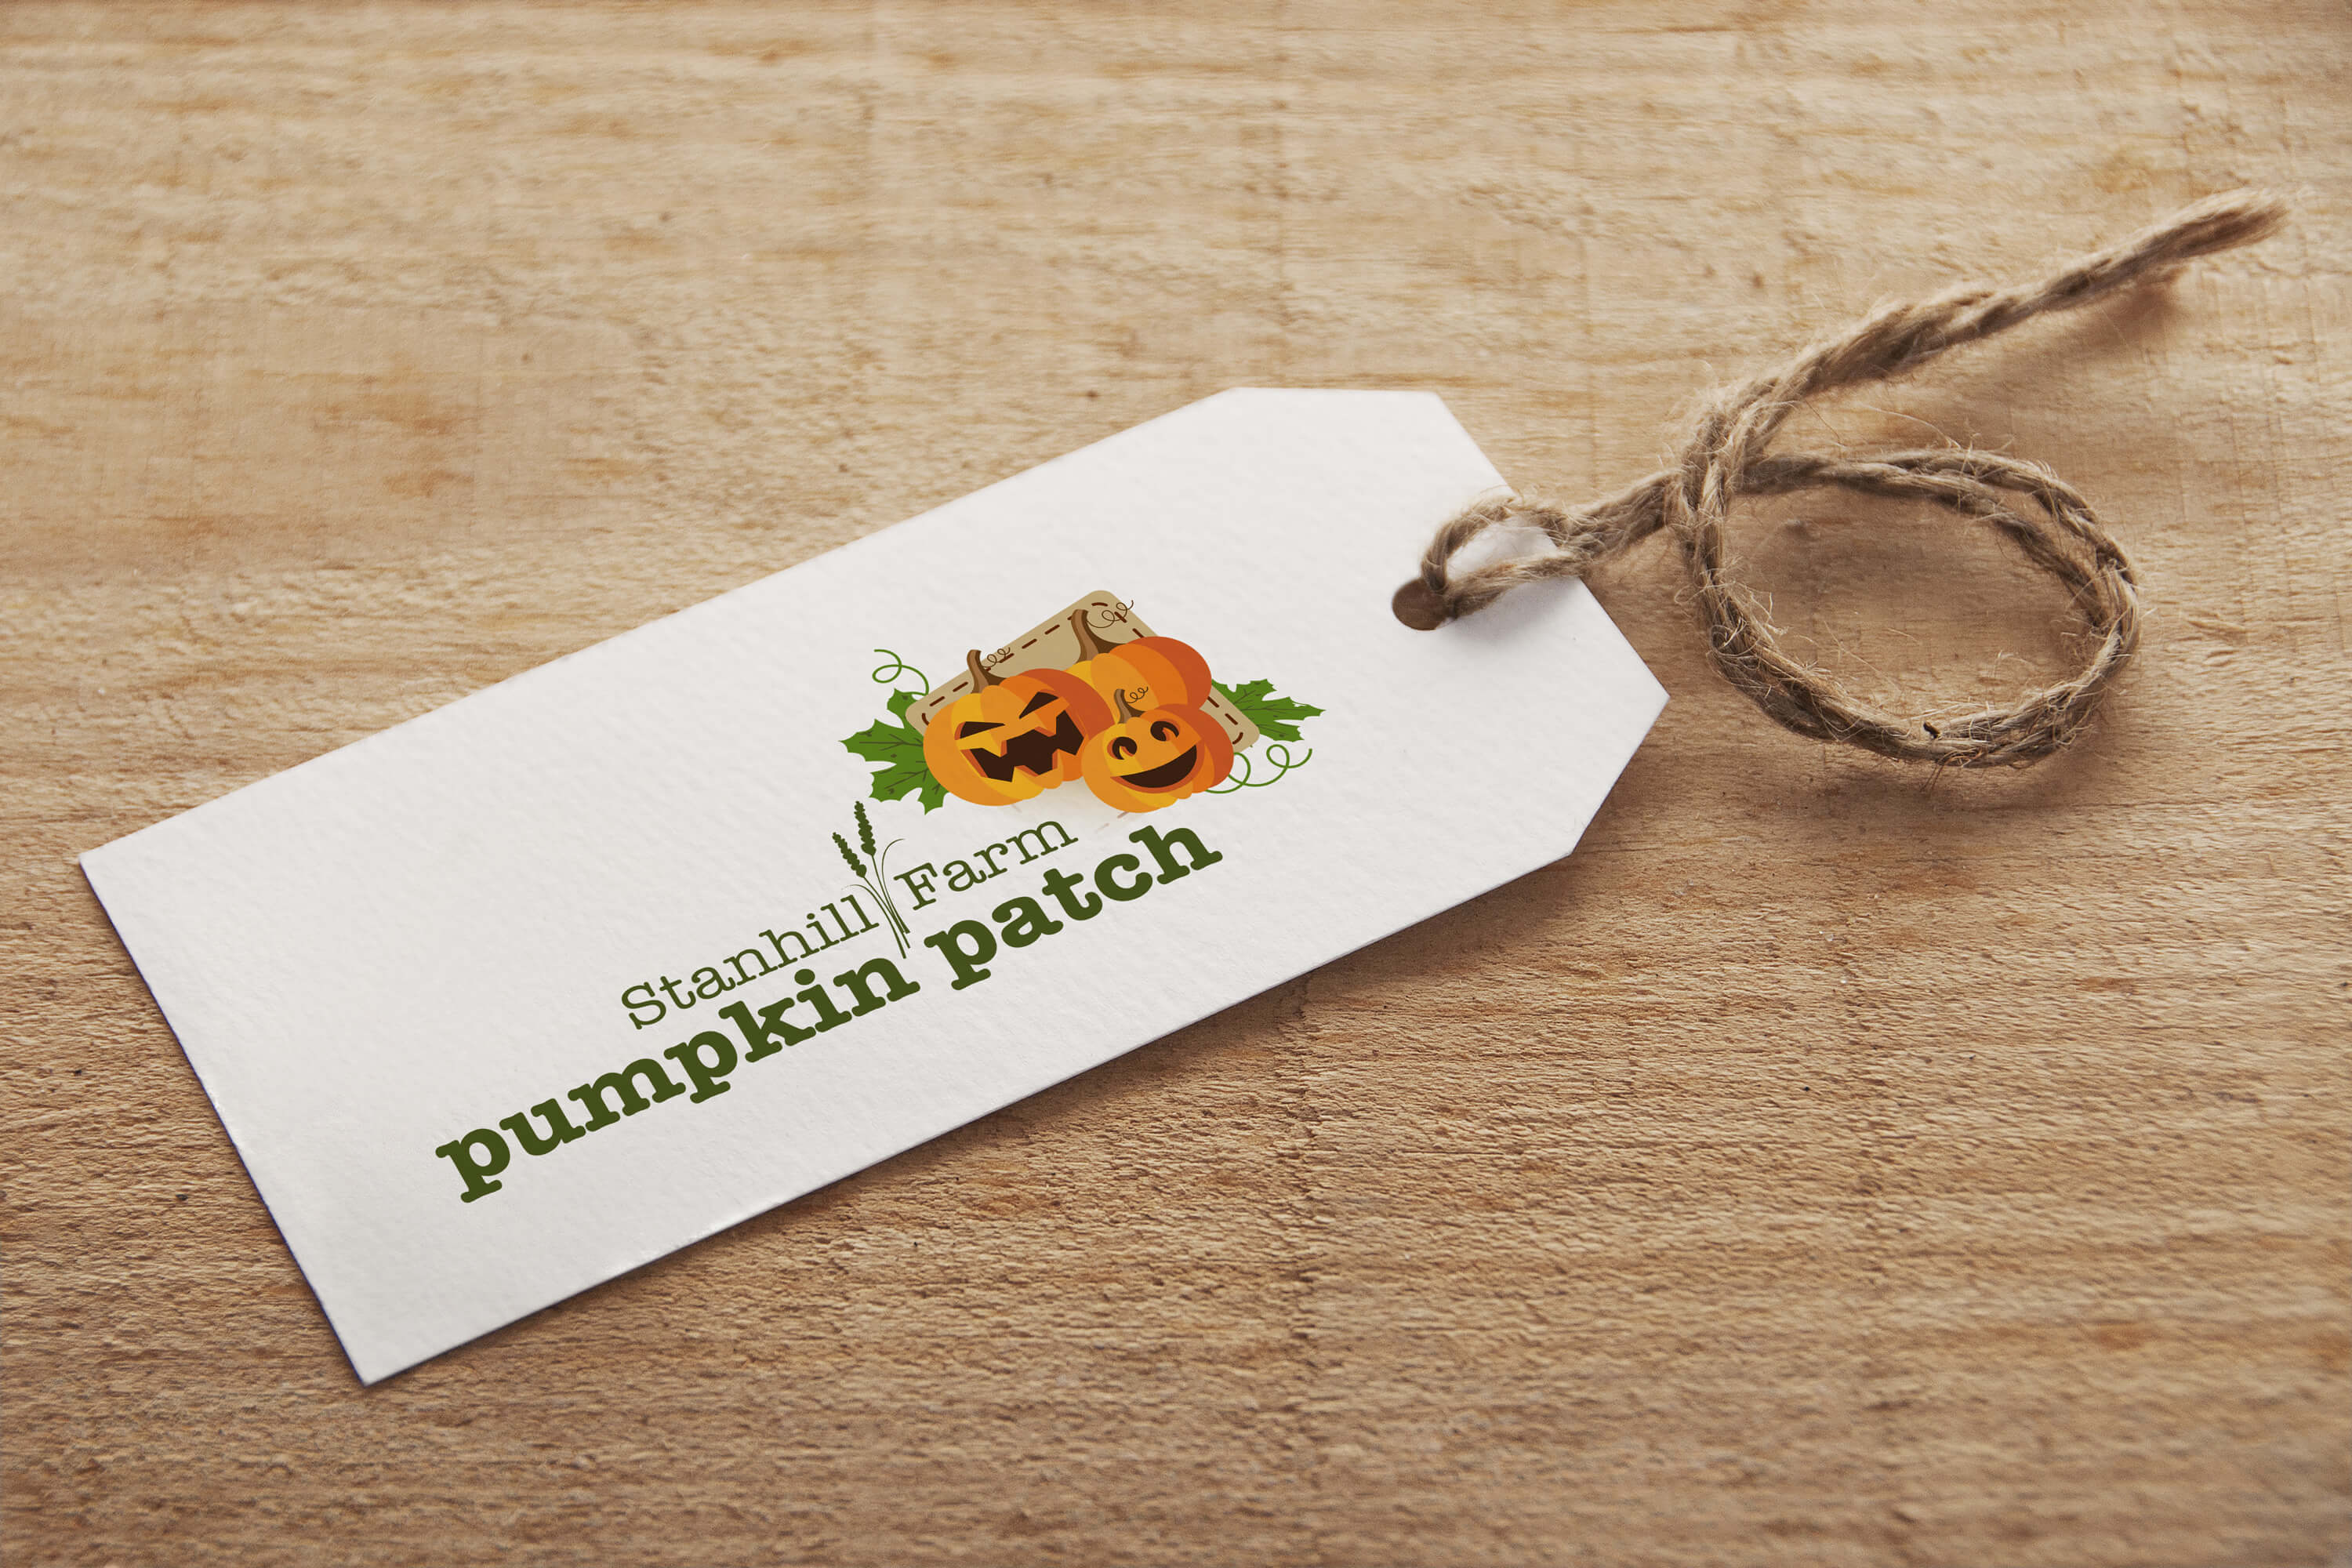 A Stanhill Farm Pumpkin Patch logo printed on a paper tag